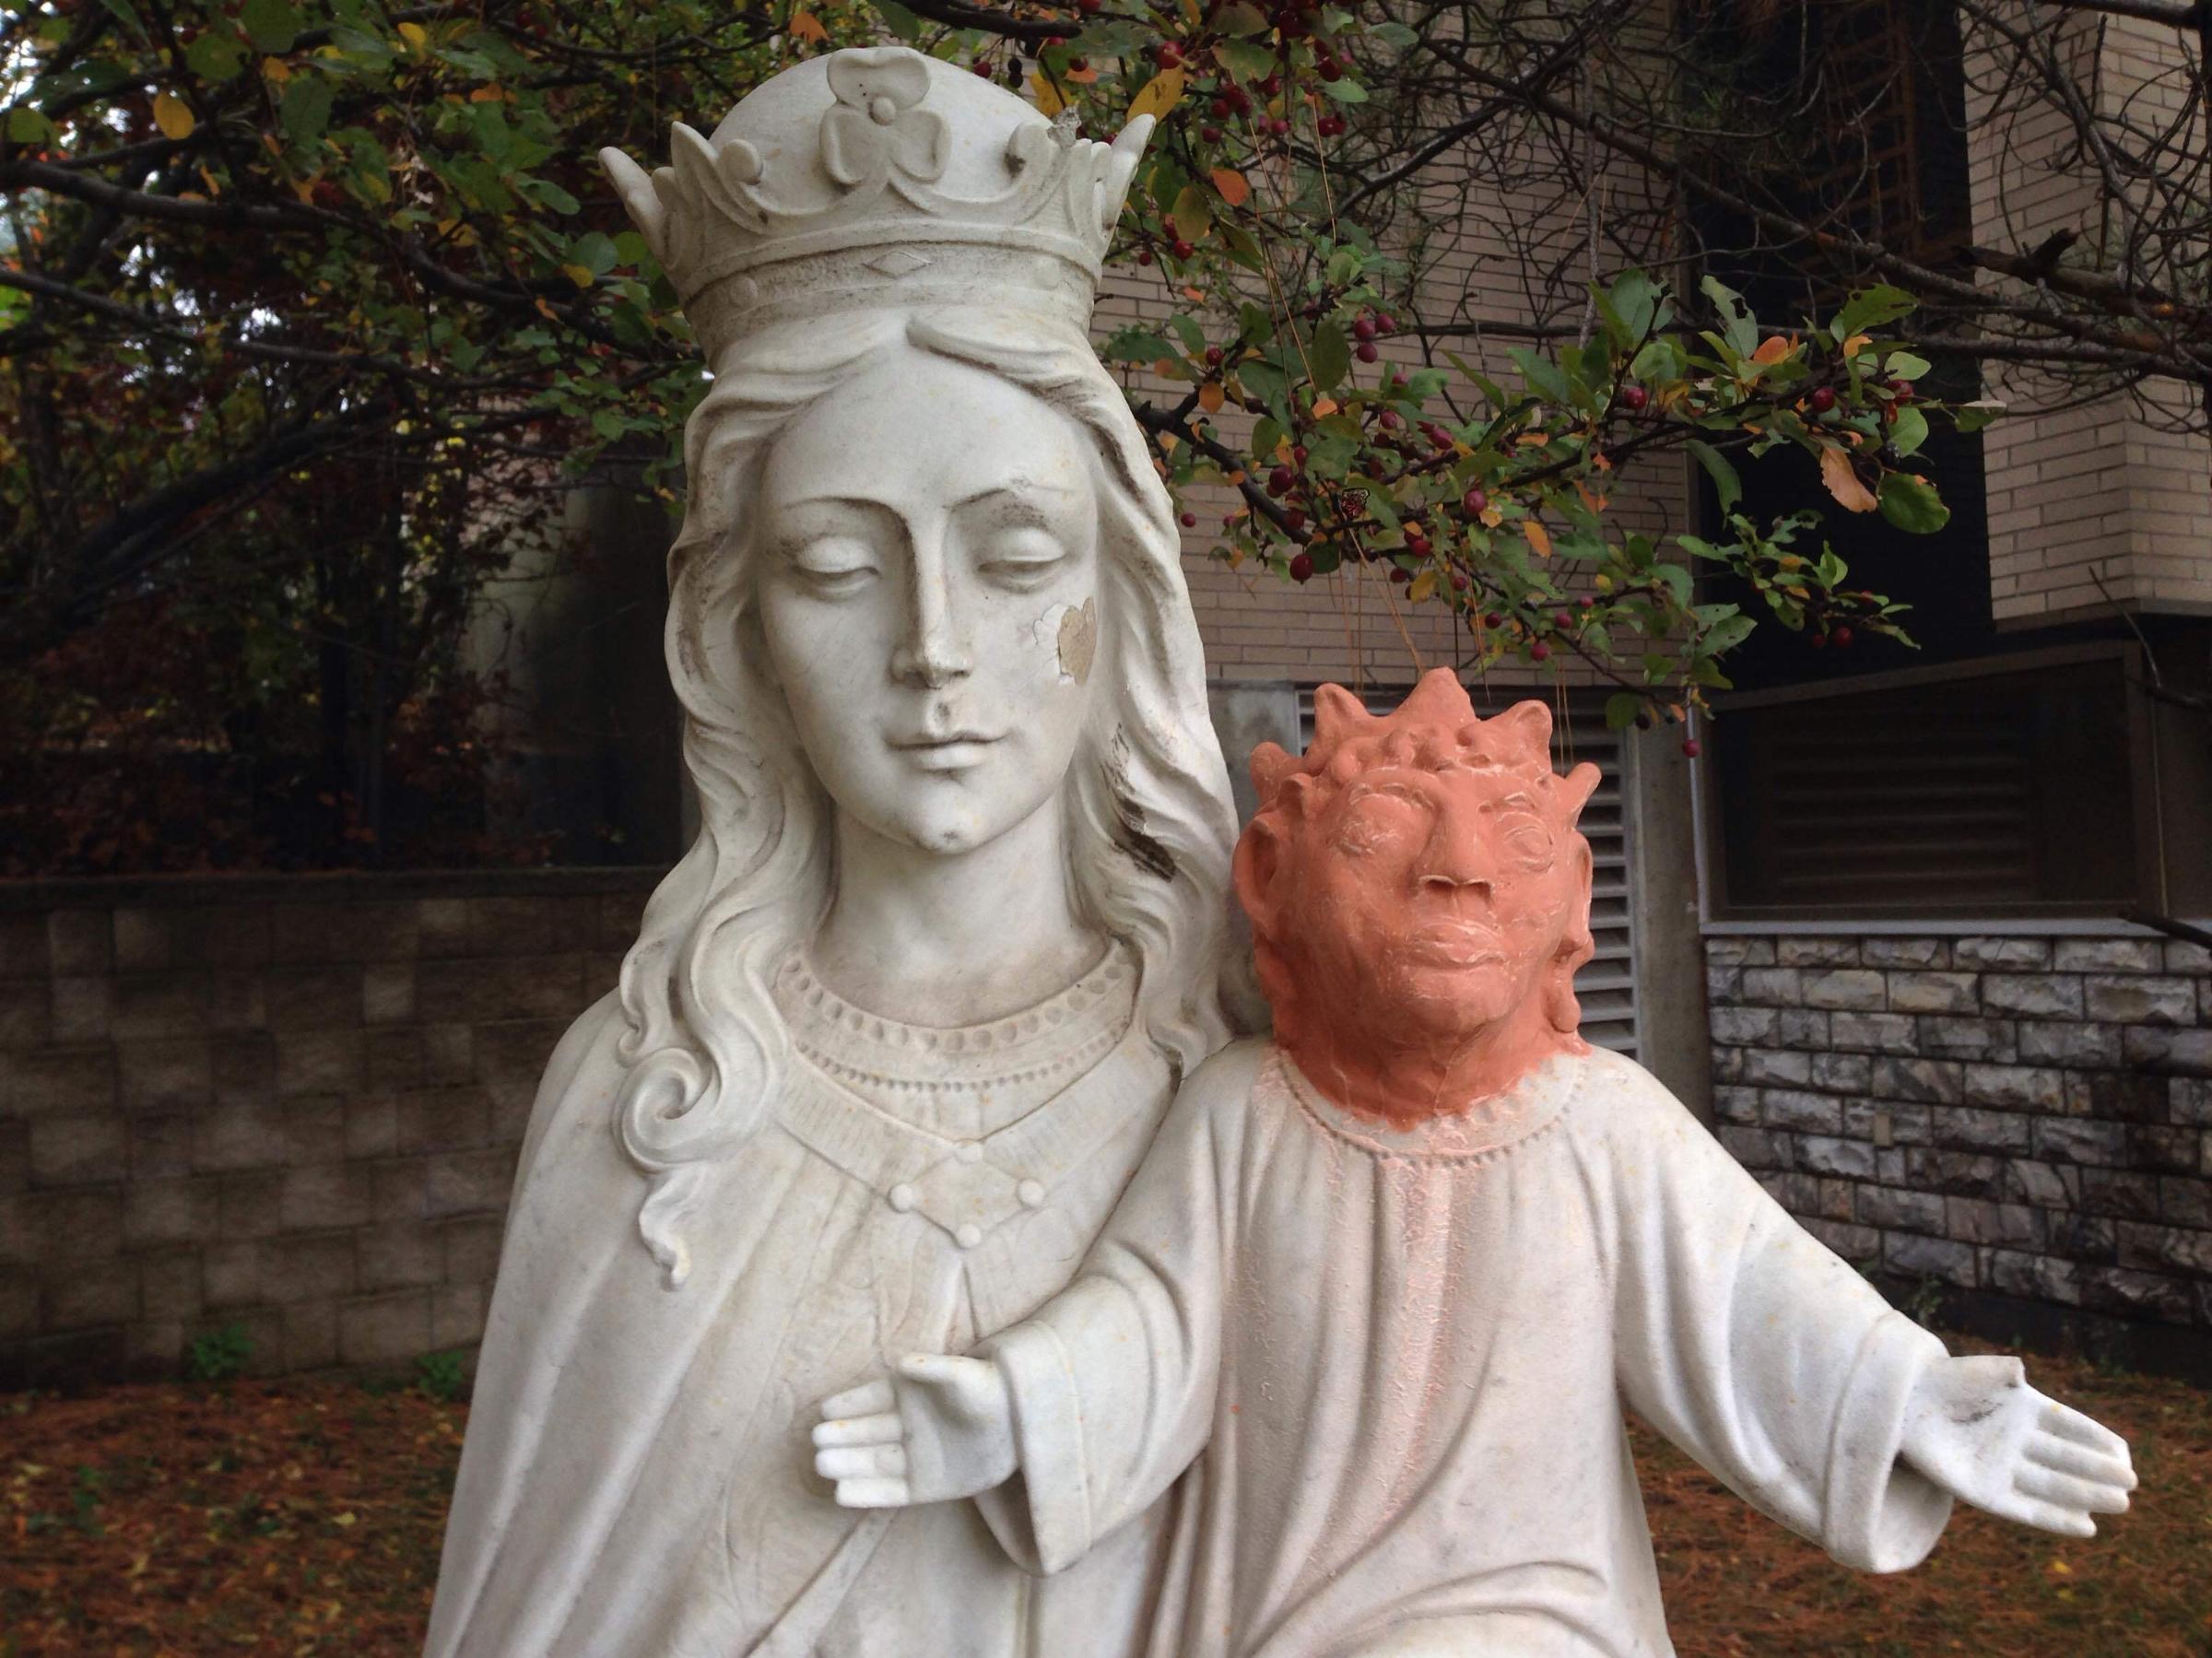 New Head For Jesus Statue That Prompted Double Takes Is Gone | KUOW ...